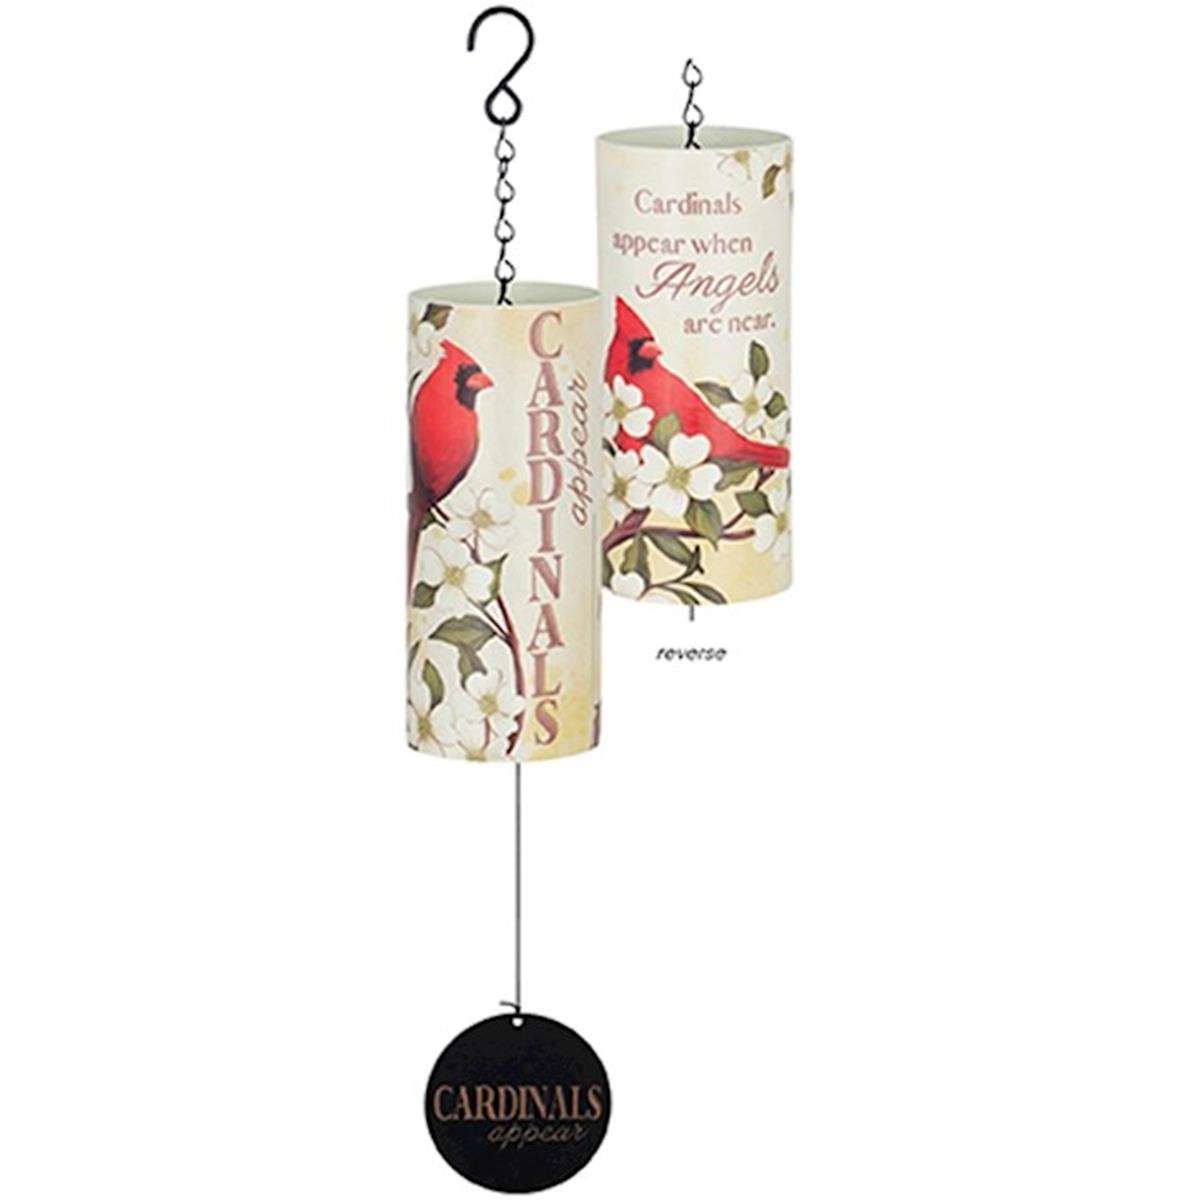 Picture of Carson Home Accents 272774 18 in. Cylinder Wind Chime with Sonnet&#44; Cardinals Appear When Angels are Near